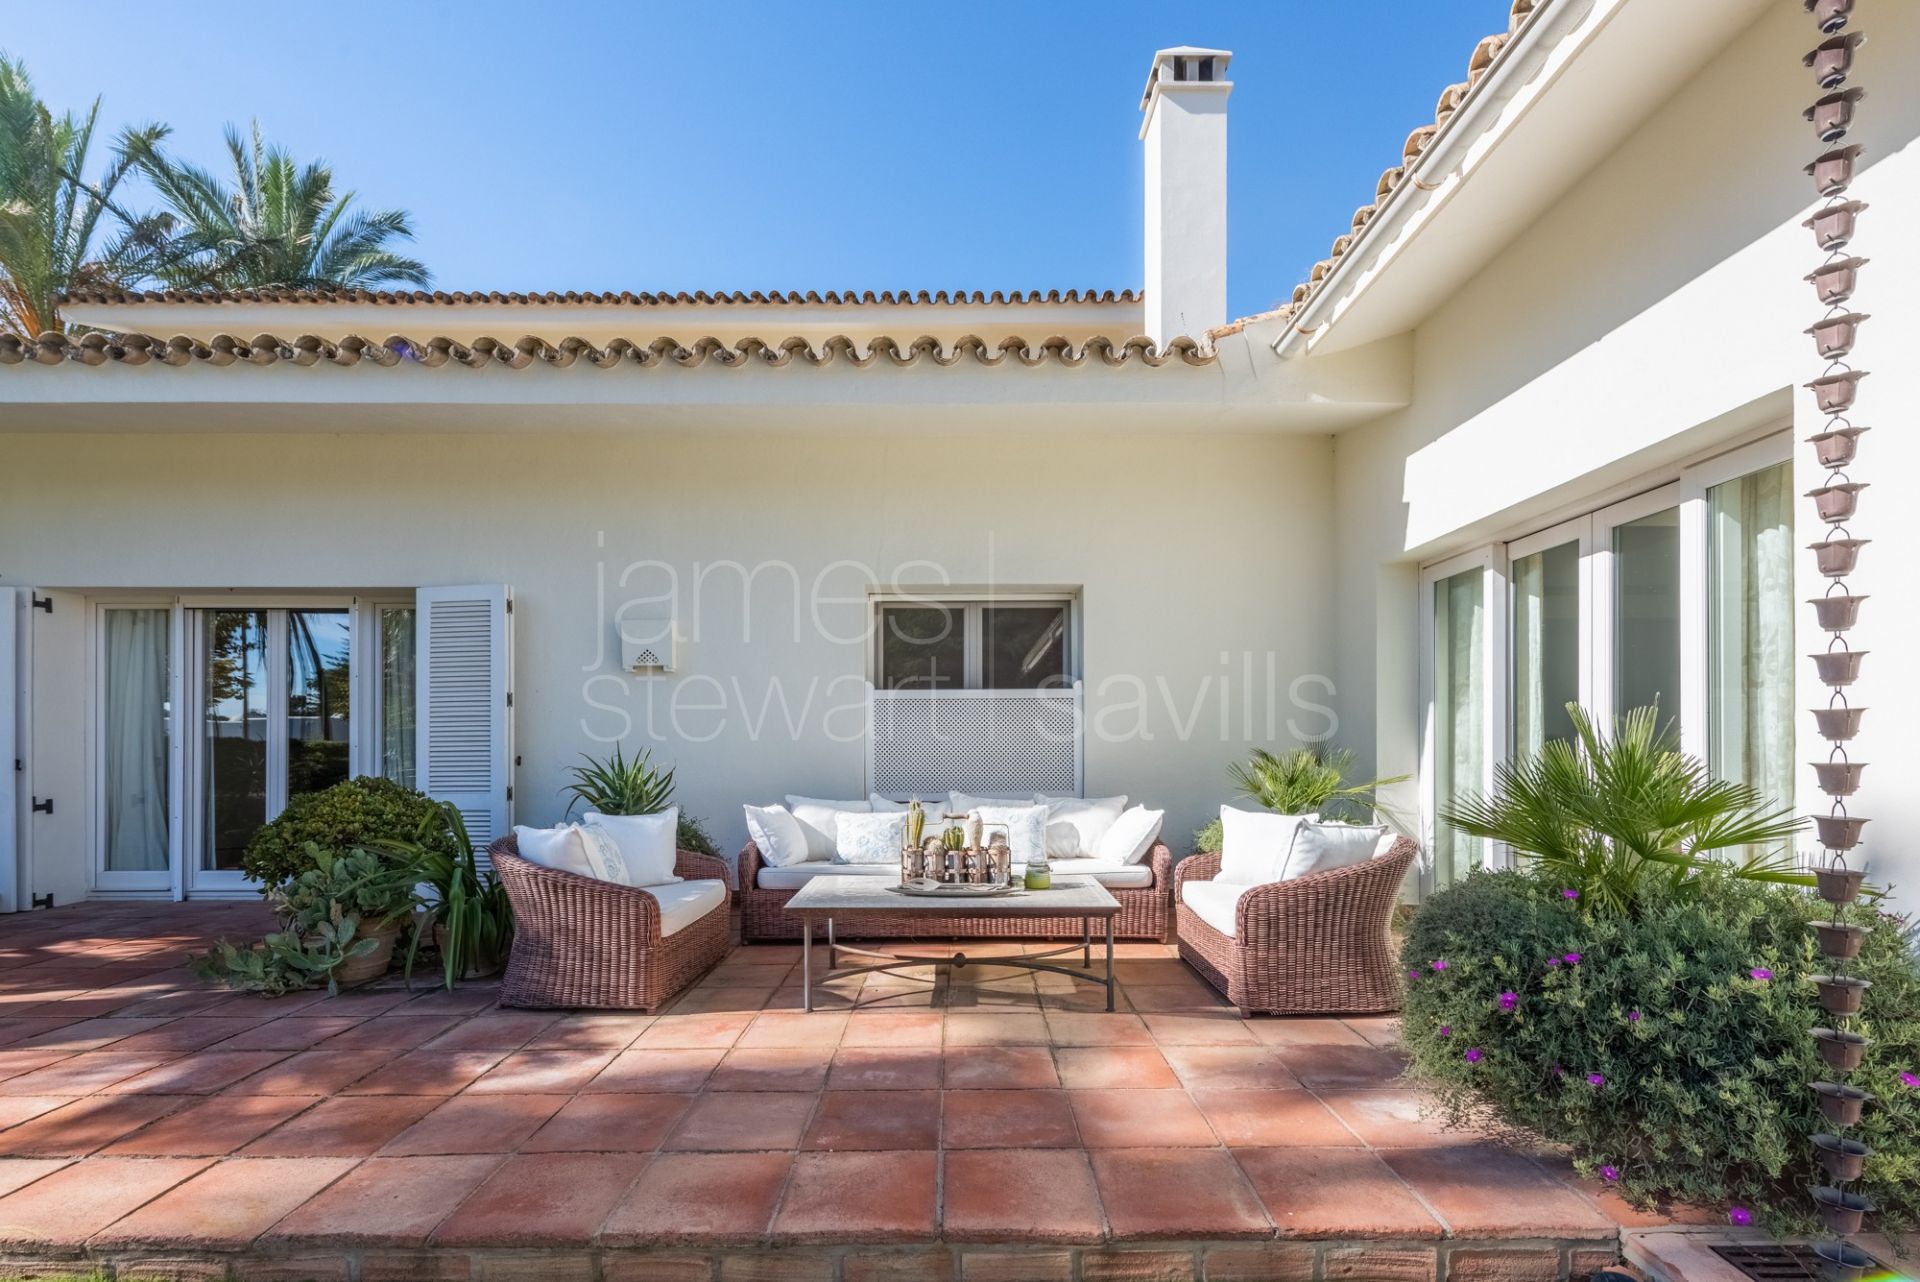 A very stylish house set in a beautiful garden in the Kings and Queens area of Sotogrande Costa